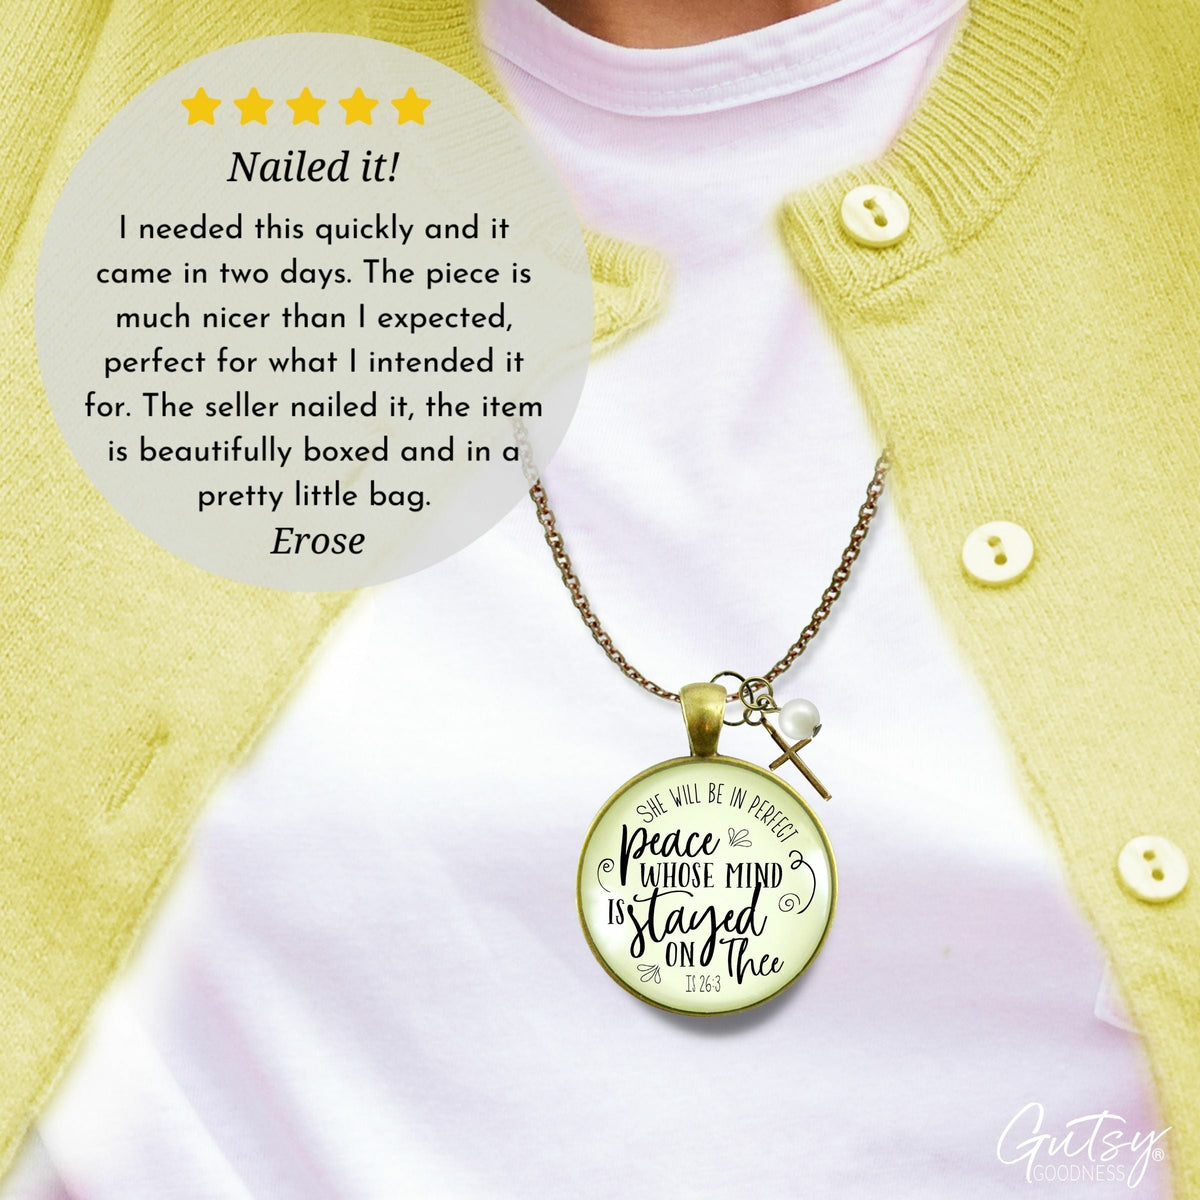 Gutsy Goodness Peaceful Necklace She Will Perfect Peace Faith Verse Jewelry - Gutsy Goodness Handmade Jewelry;Peaceful Necklace She Will Perfect Peace Faith Verse Jewelry - Gutsy Goodness Handmade Jewelry Gifts